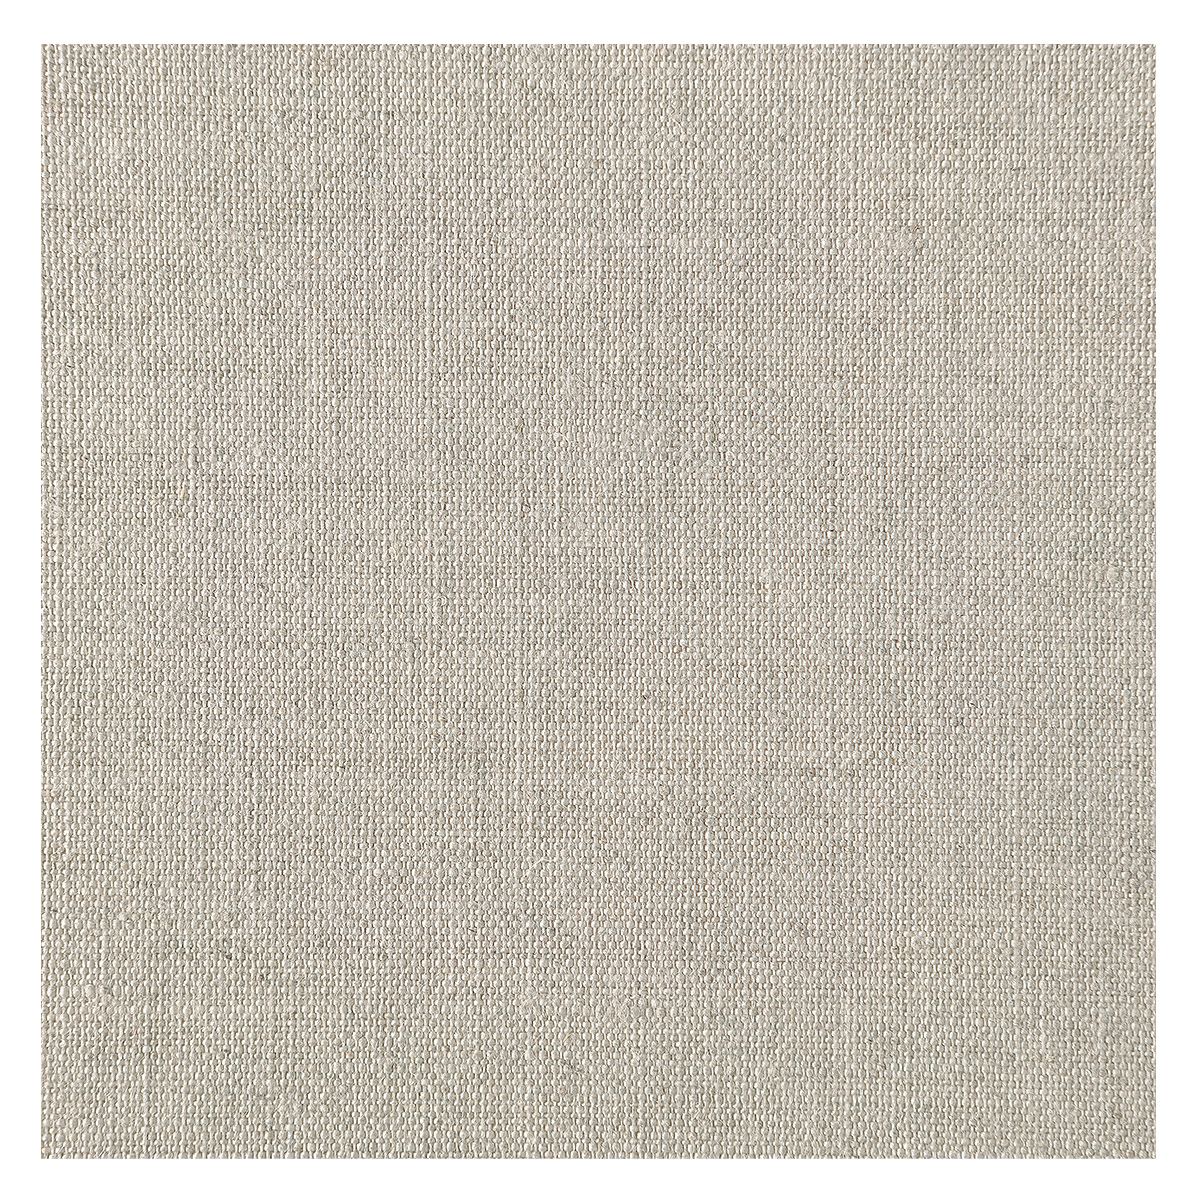 M Linen, 6.49 oz (220 gsm), extra-fine, tightly woven texture with a smooth surface